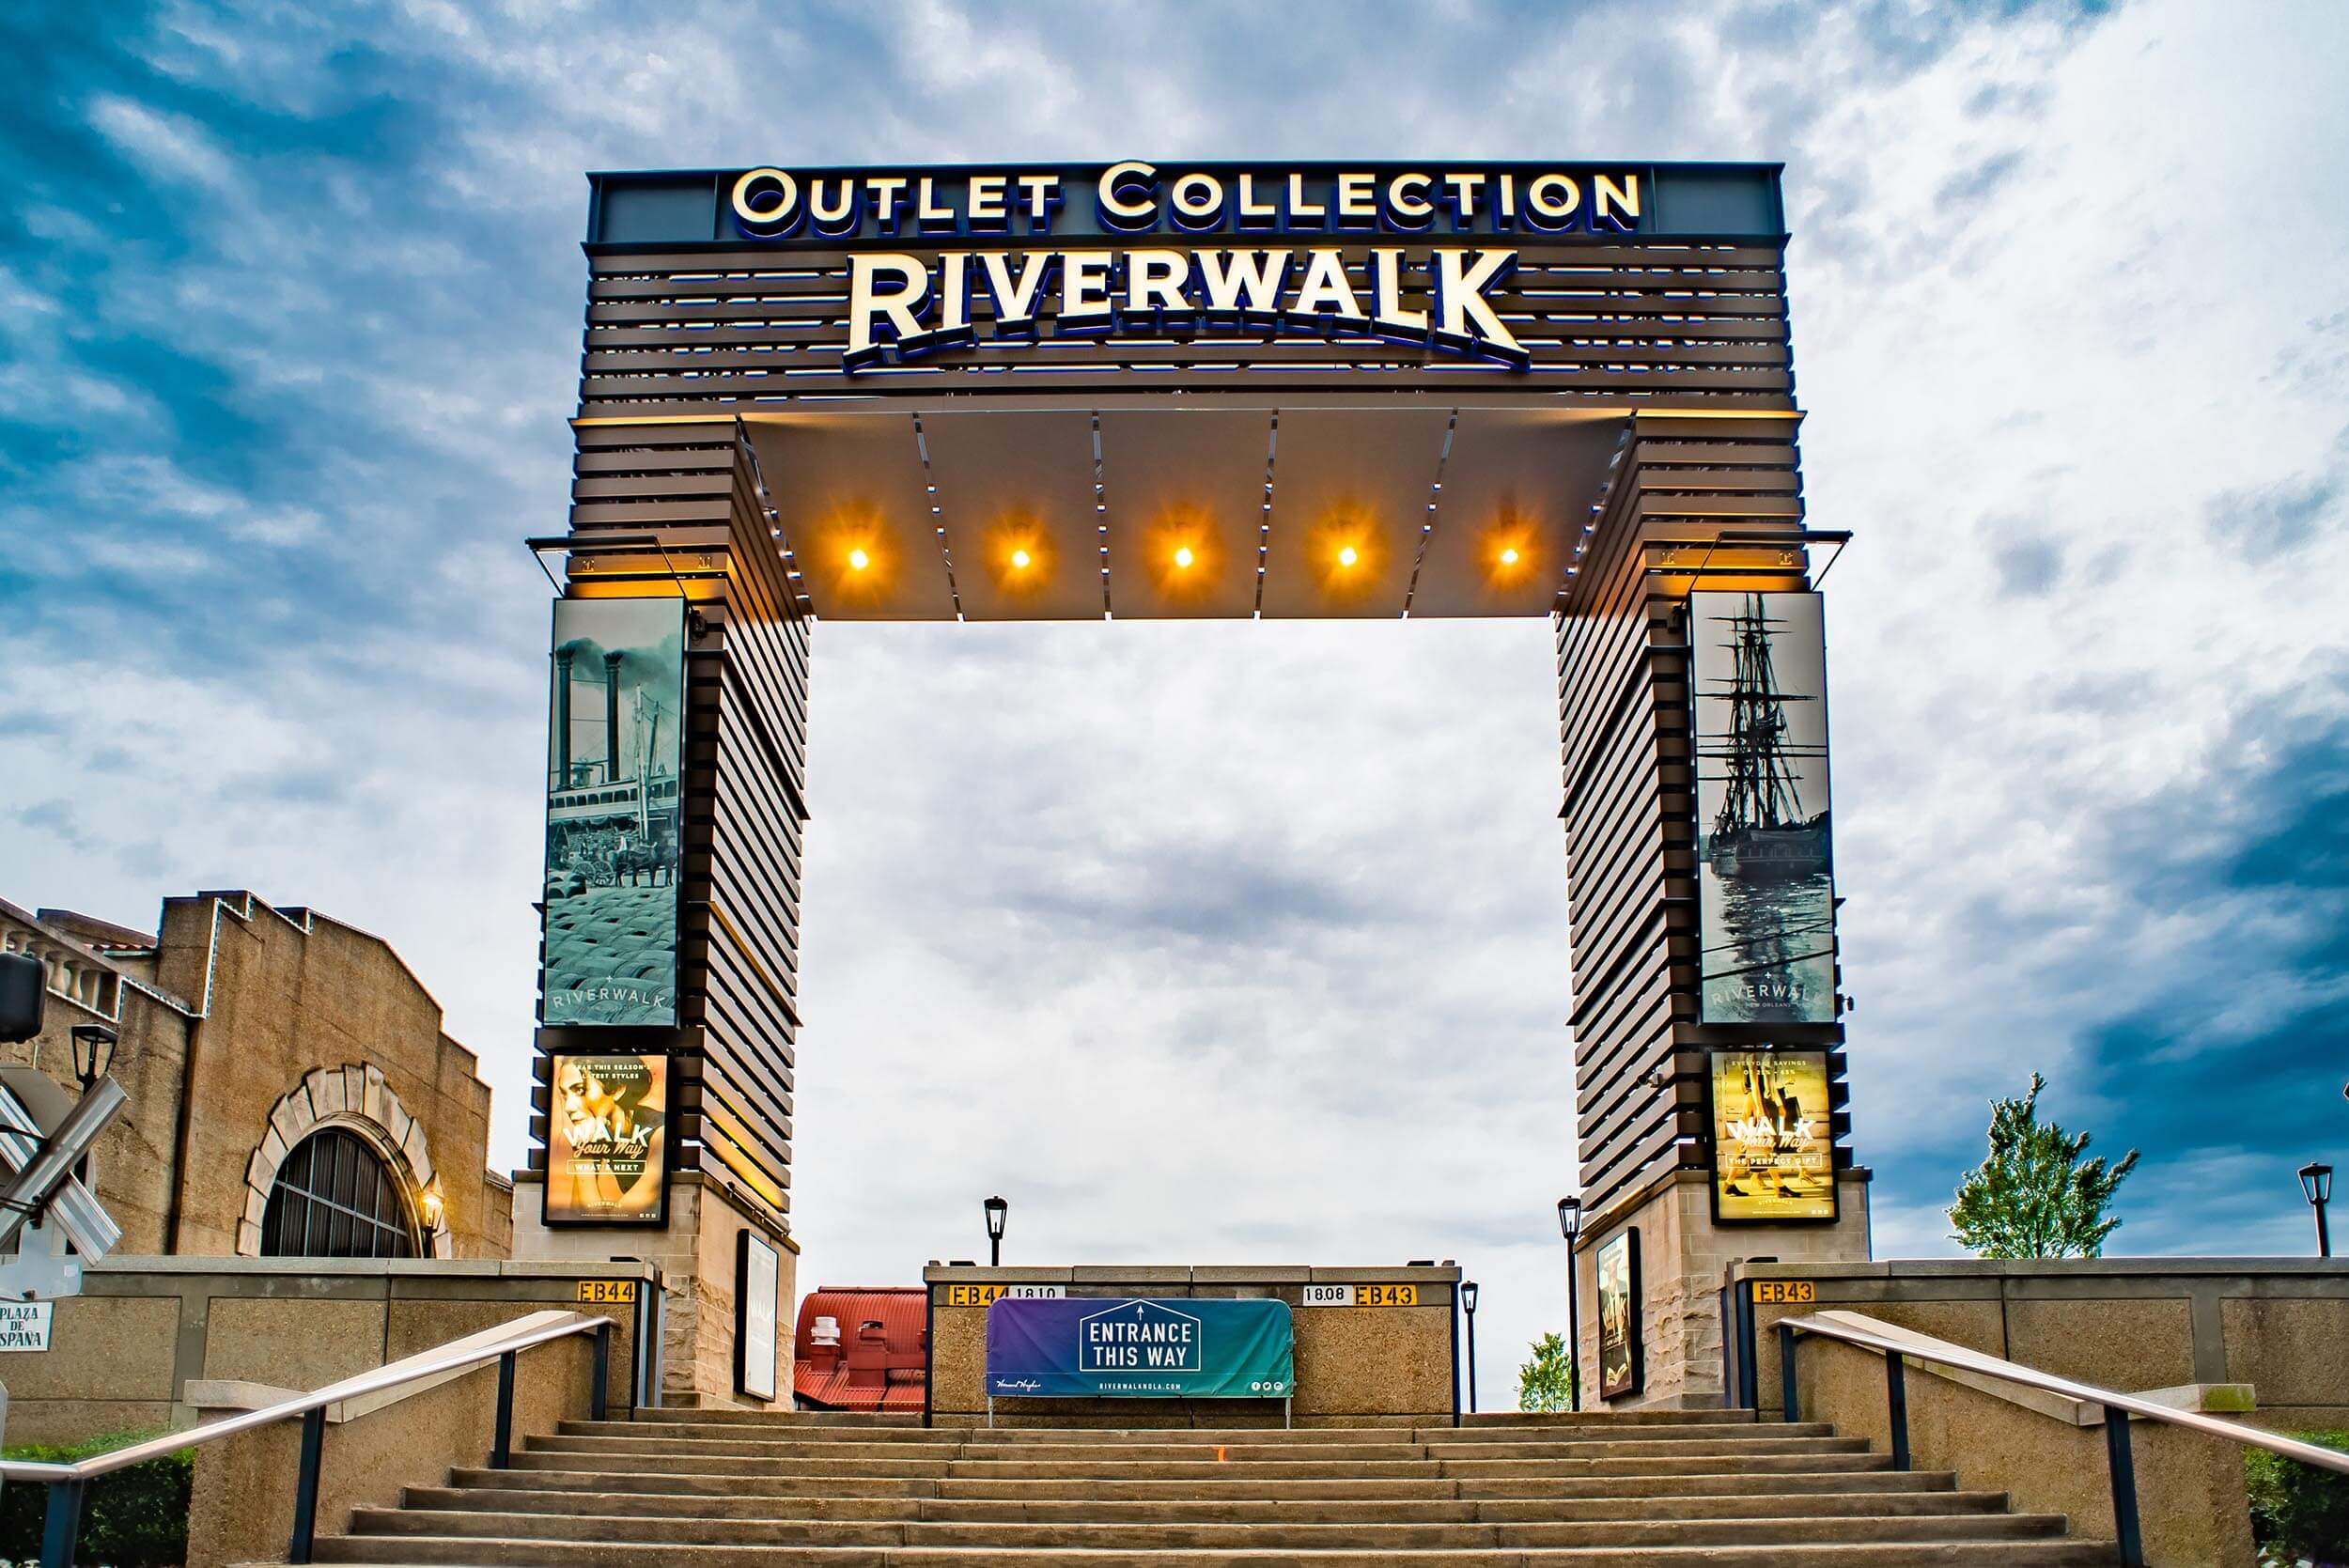 The entrance arch to the Outlet Collection at Riverwalk in New Orleans